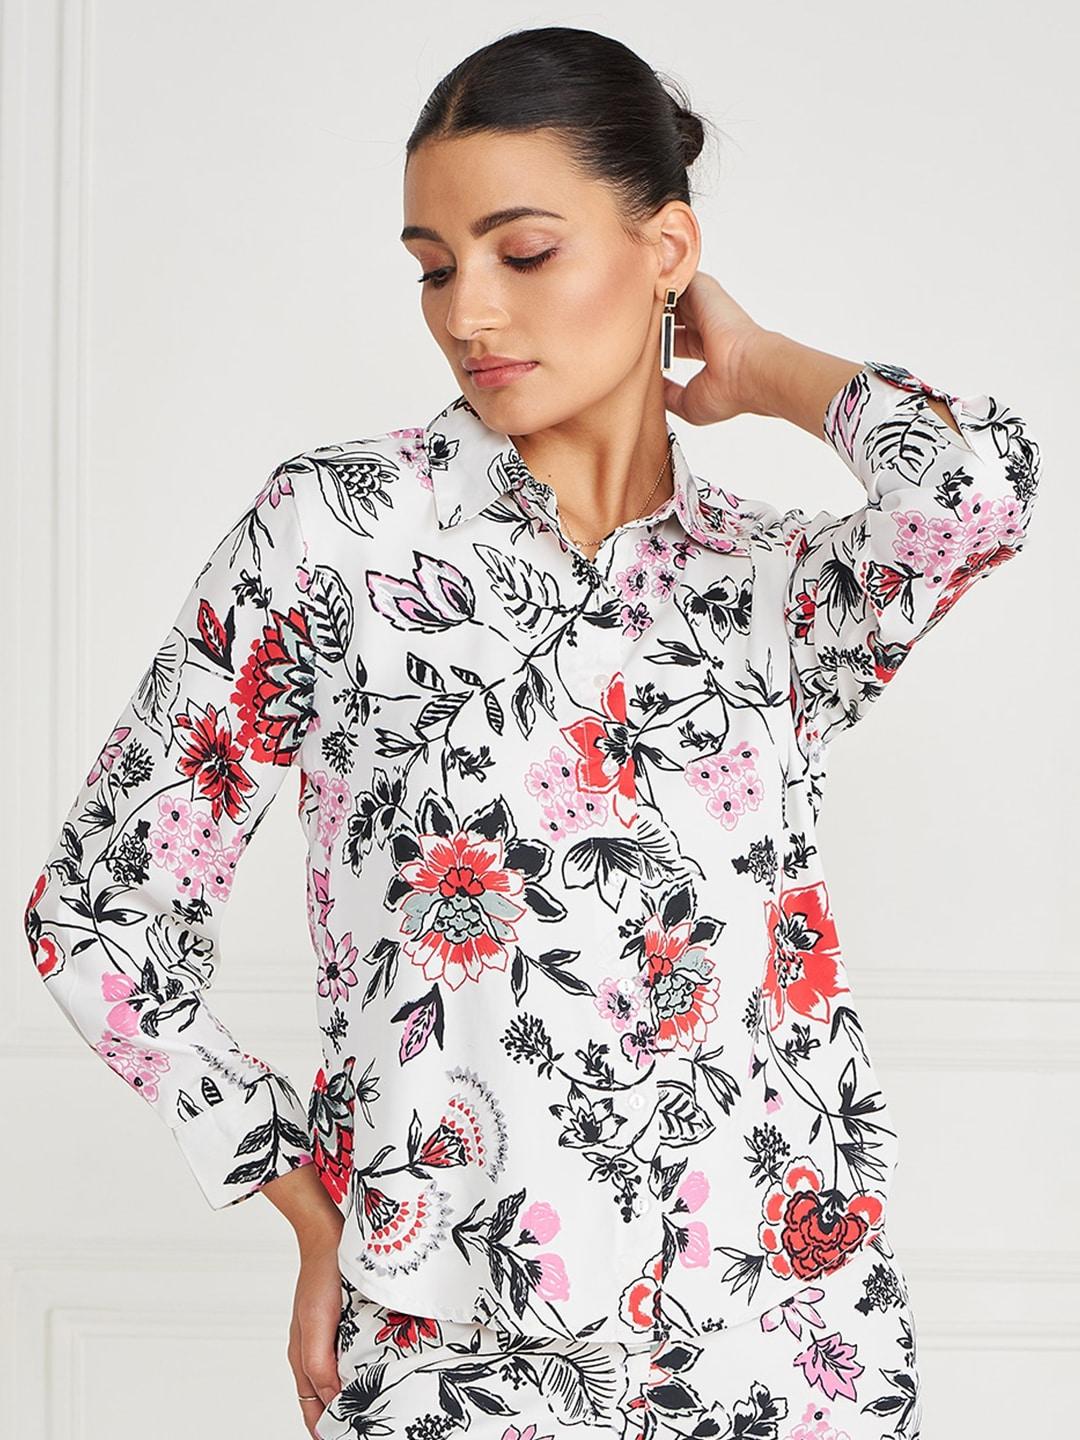 kassually floral printed spread collar casual shirt